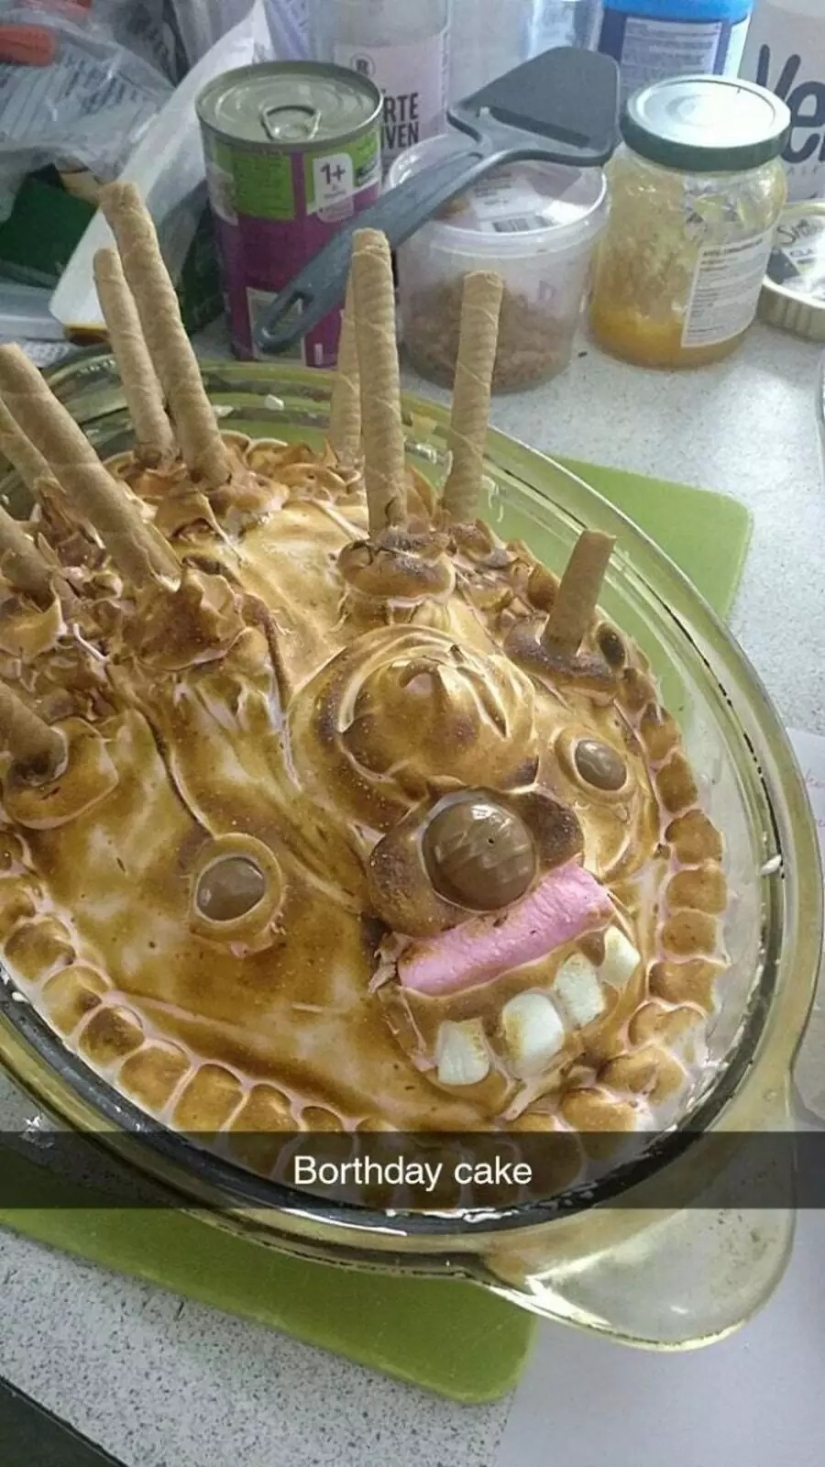 The first pancake is lumpy: 22 examples of terrible baking, which makes you uncomfortable